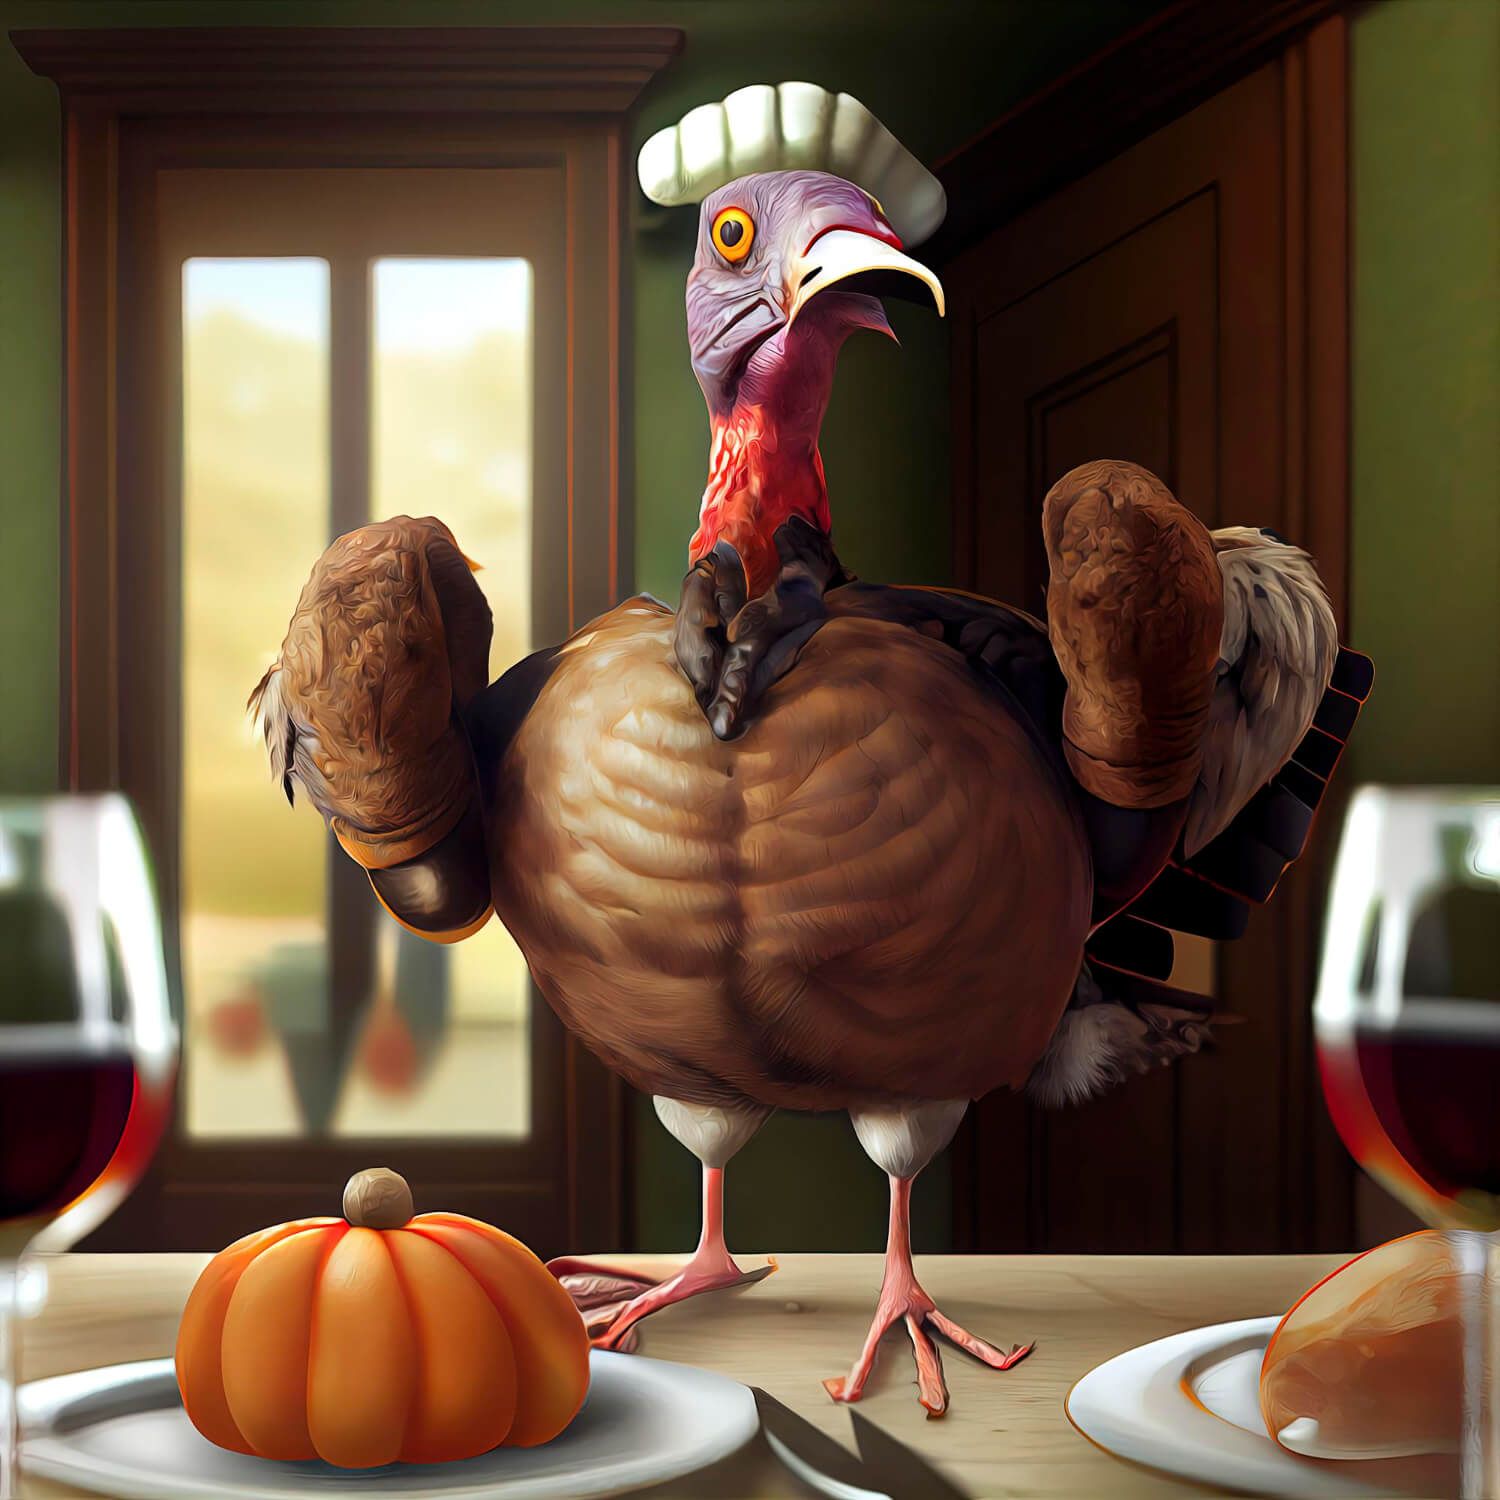 Animated image of a dancing turkey